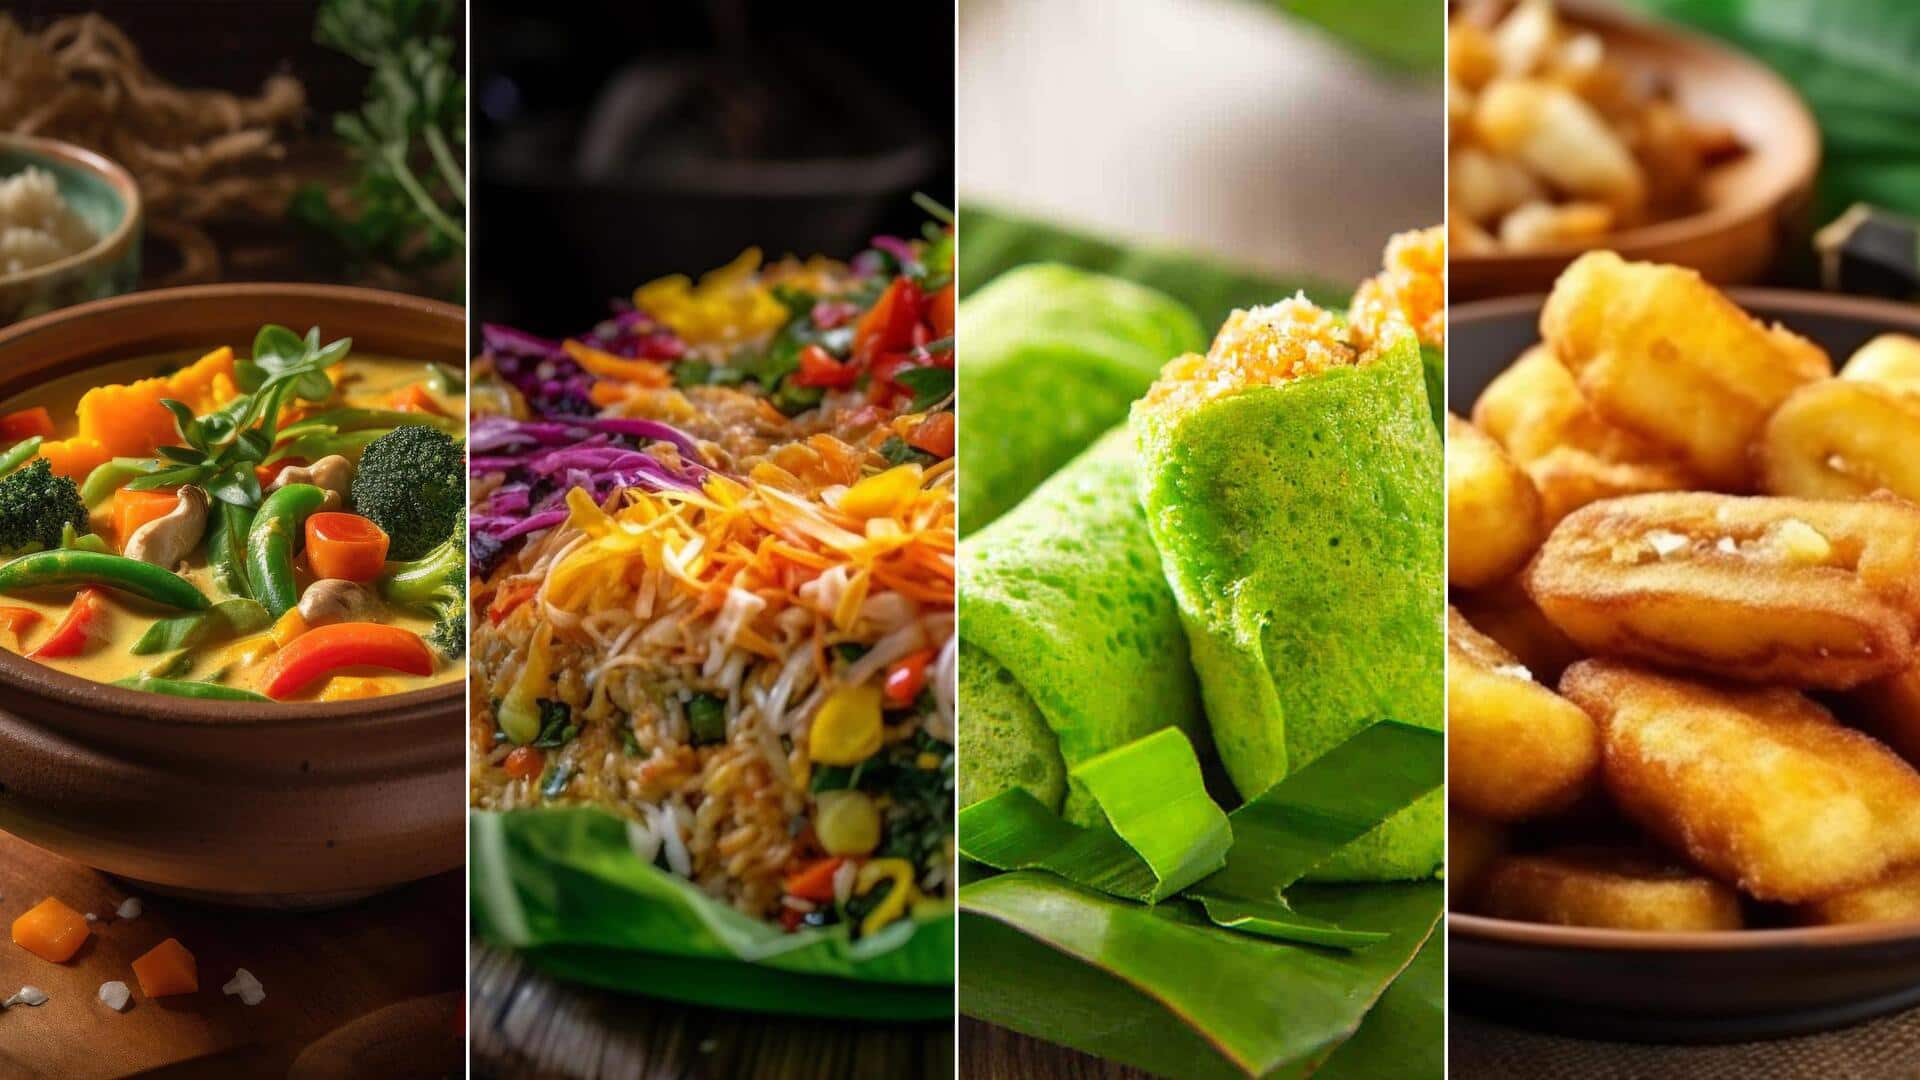 Vegetarian food that you can easily find in Bali